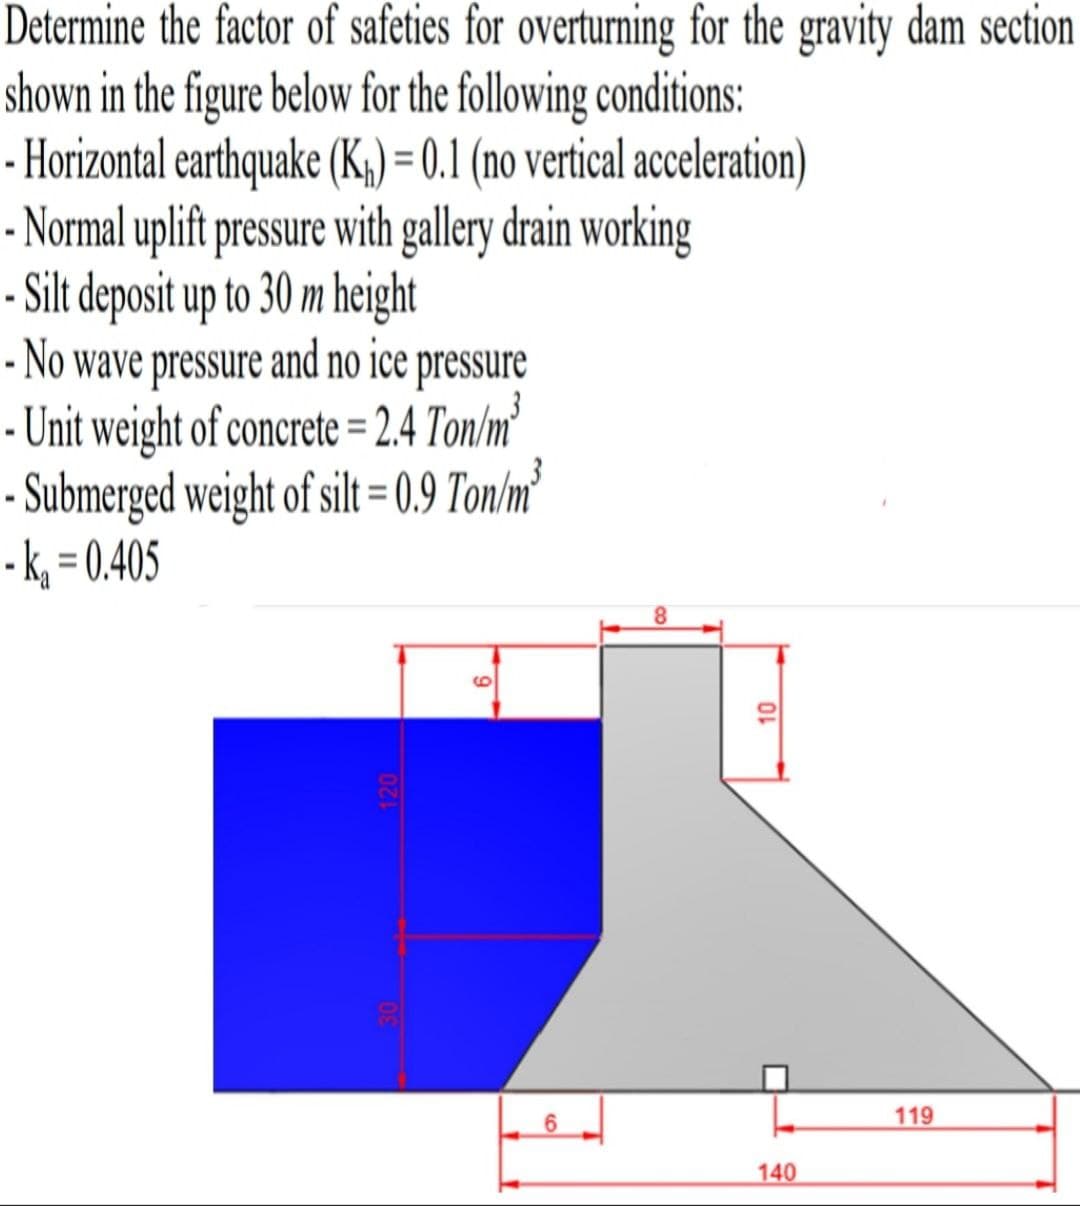 Determine the factor of safeties for overturning for the gravity dam section
shown in the figure below for the following conditions:
- Horizontal earthquake (K₁) = 0.1 (no vertical acceleration)
- Normal uplift pressure with gallery drain working
- Silt deposit up to 30 m height
- No wave pressure and no ice pressure
- Unit weight of concrete = 2.4 Ton/m³
- Submerged weight of silt=0.9 Ton/m³
- k₁=0.405
120
6
6
8
10
140
119